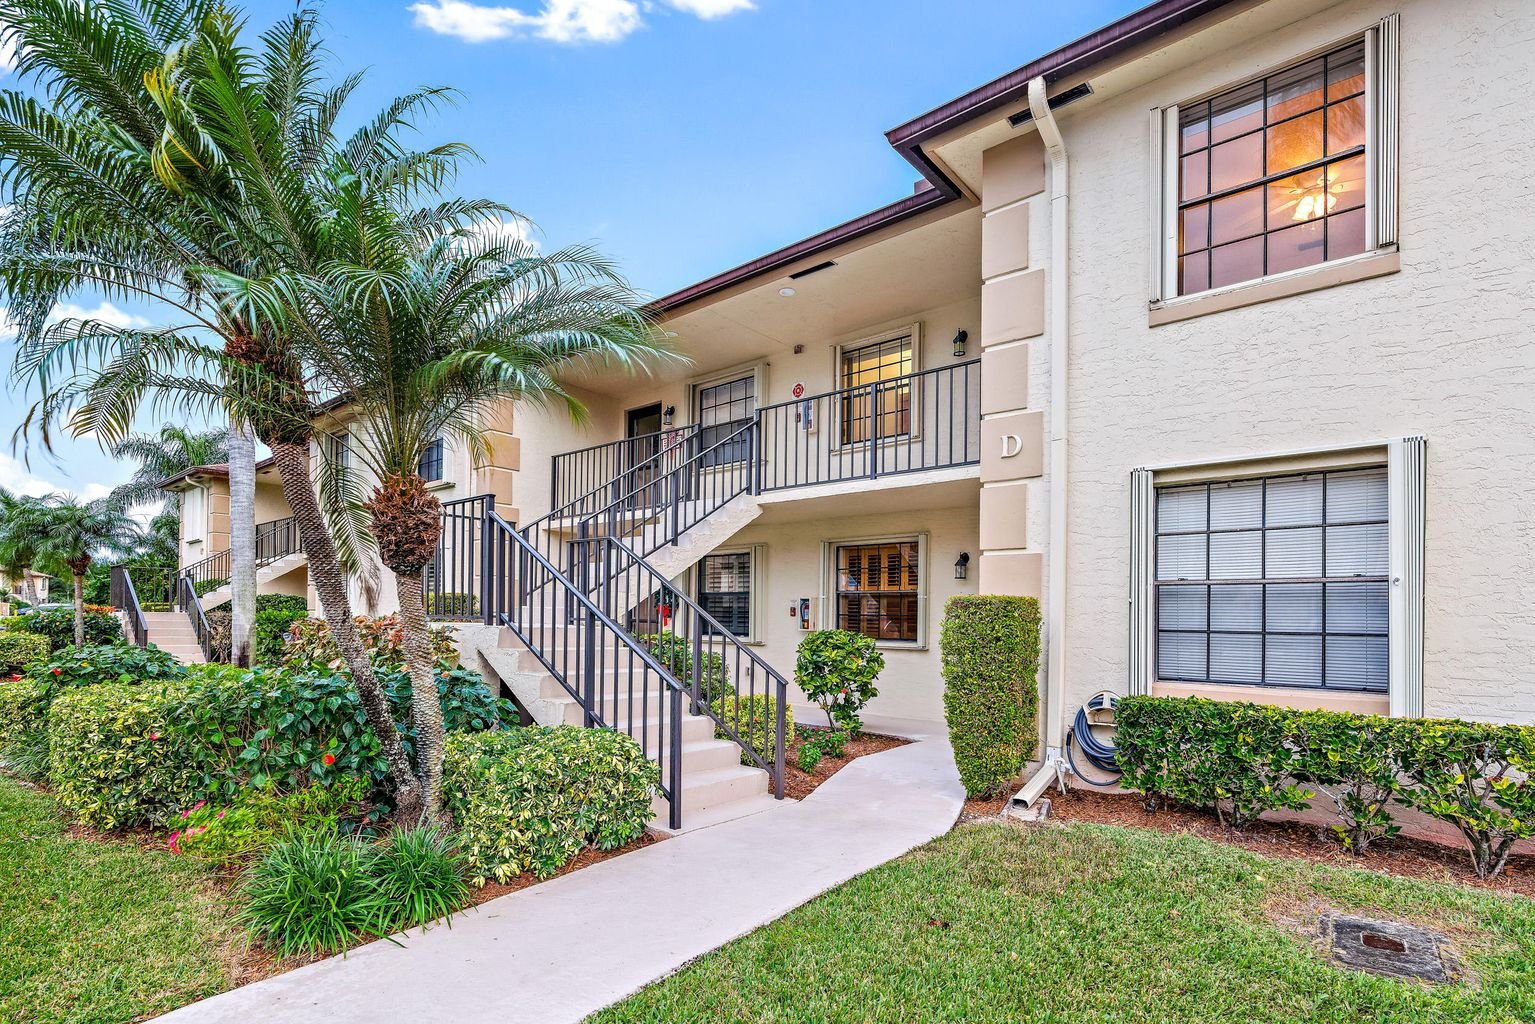 Second-story condo for rent in Jupiter